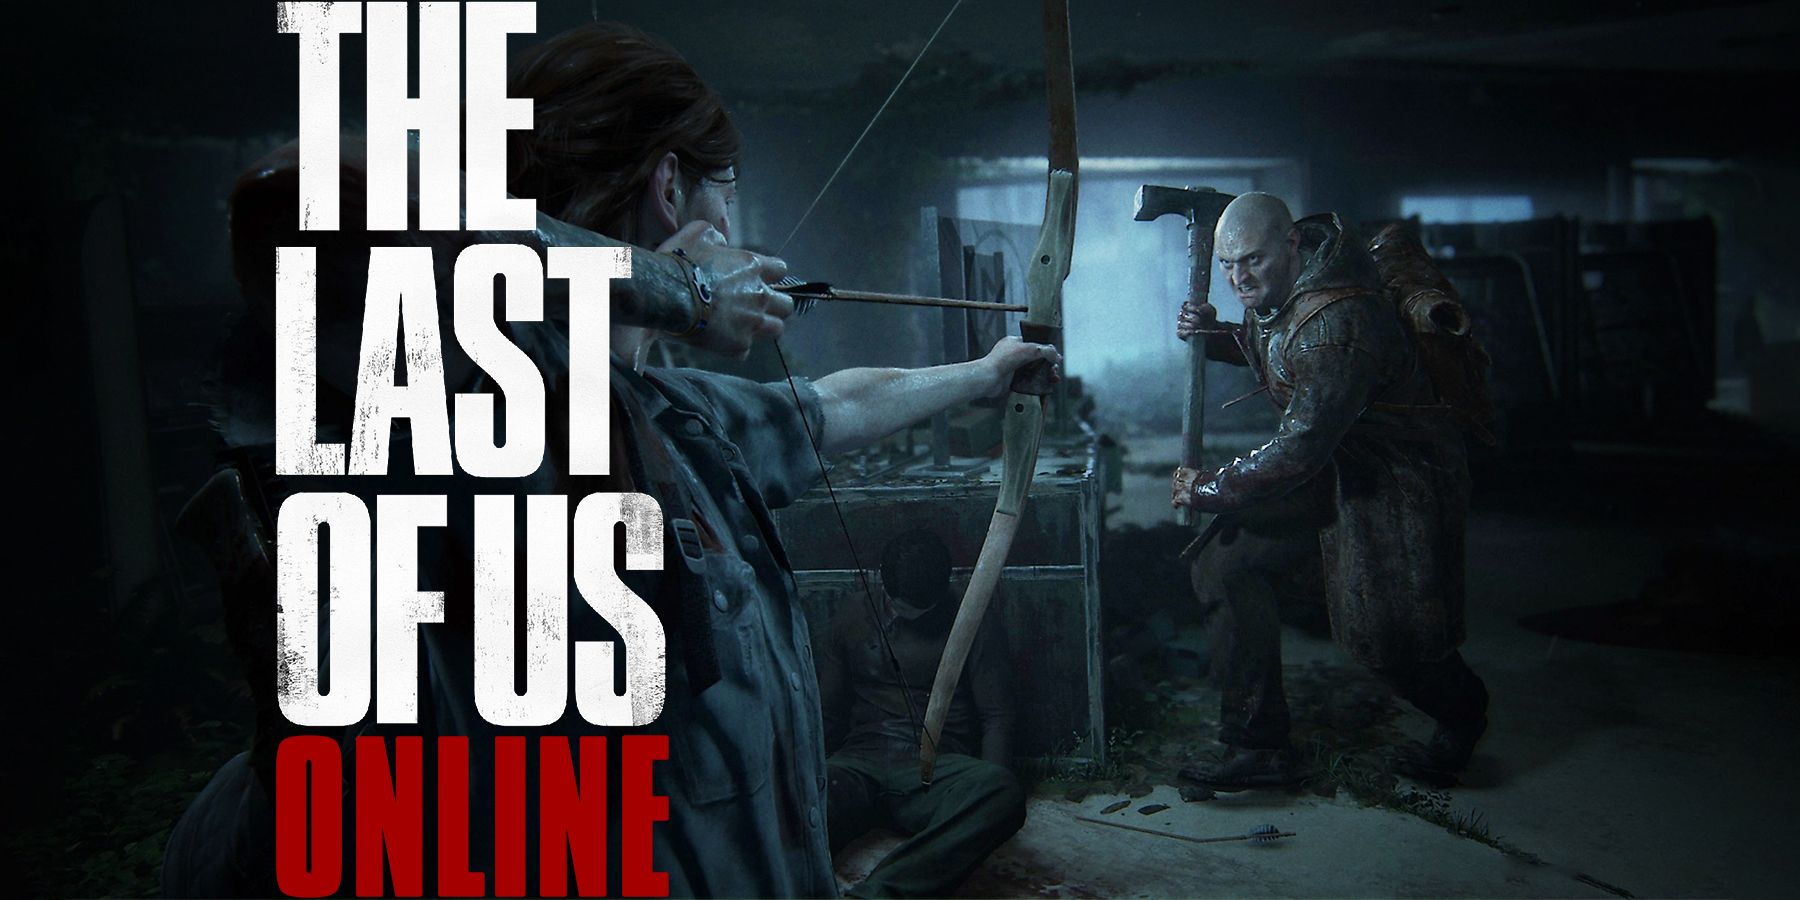 The Last of Us Online Main Menu Image Reportedly Leaks Right After  Cancellation - FandomWire